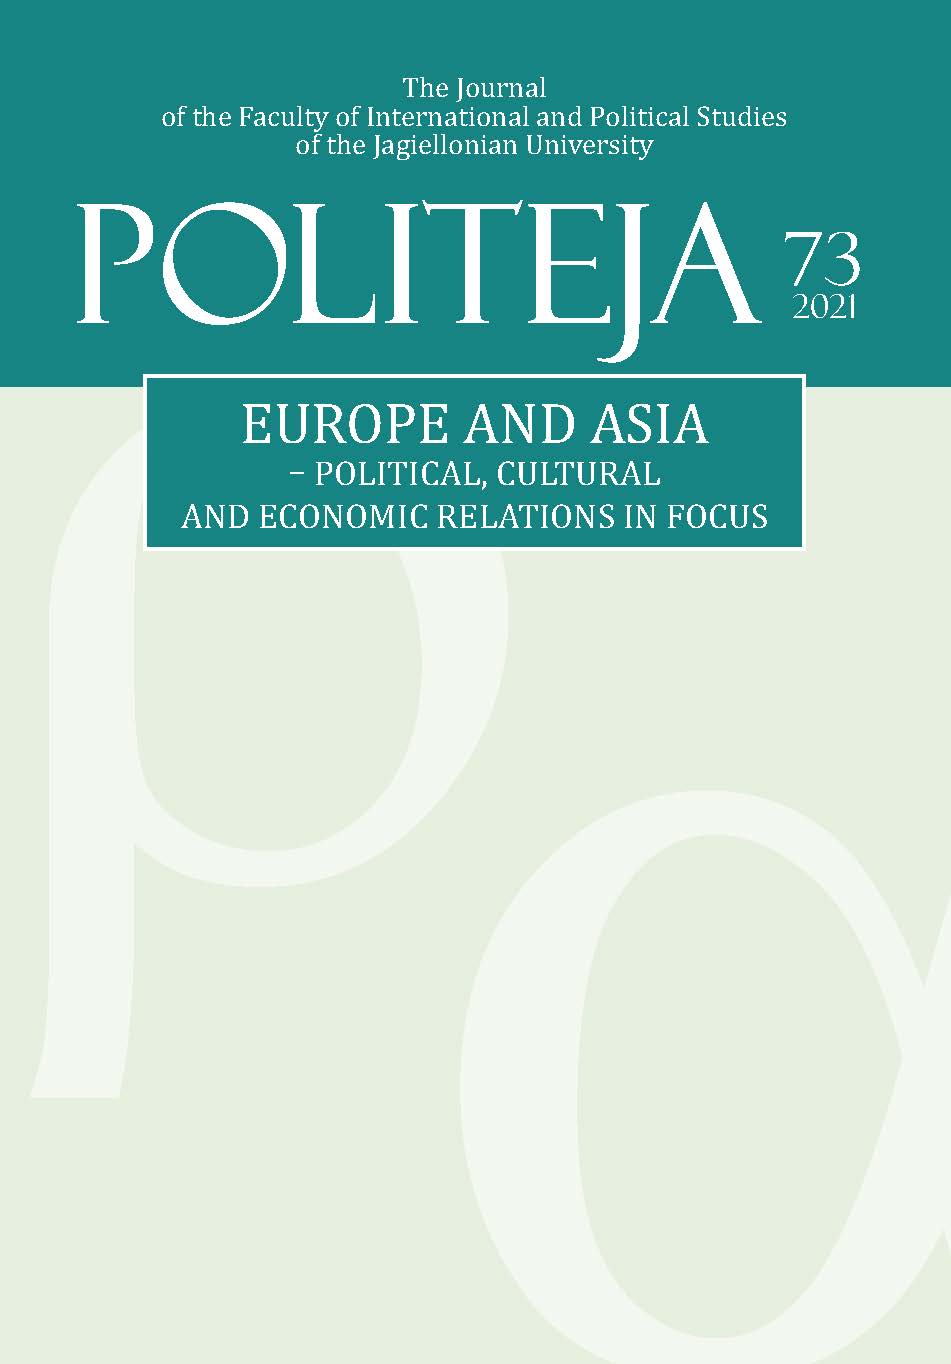 					View Vol. 18 No. 4(73) (2021): Europe and Asia ‒ Political, Cultural and Economic Relations in Focus
				